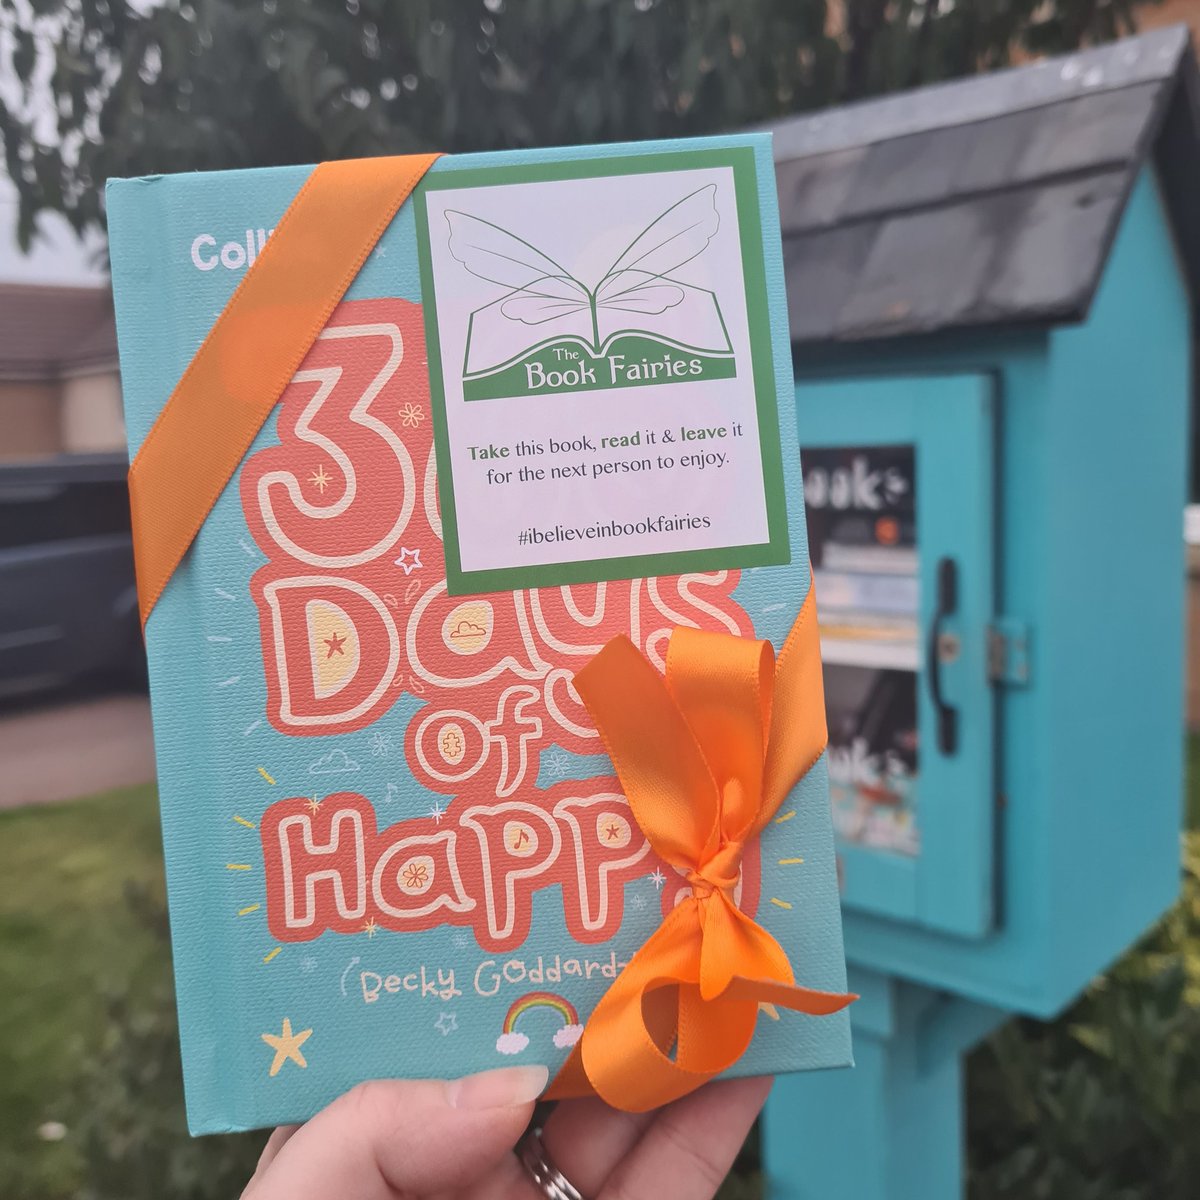 'Give EVERY day the chance to become the most BEAUTIFUL day of your life' Who will be lucky enough to find this copy of 365 Days of Happy by Becky Goddard-Hill? #IBelieveInBookFairies #TBF365Days #BeckyGoddardHill #TBFCollins #Collins4Parents #EmotionallyHealthyKids #365Days